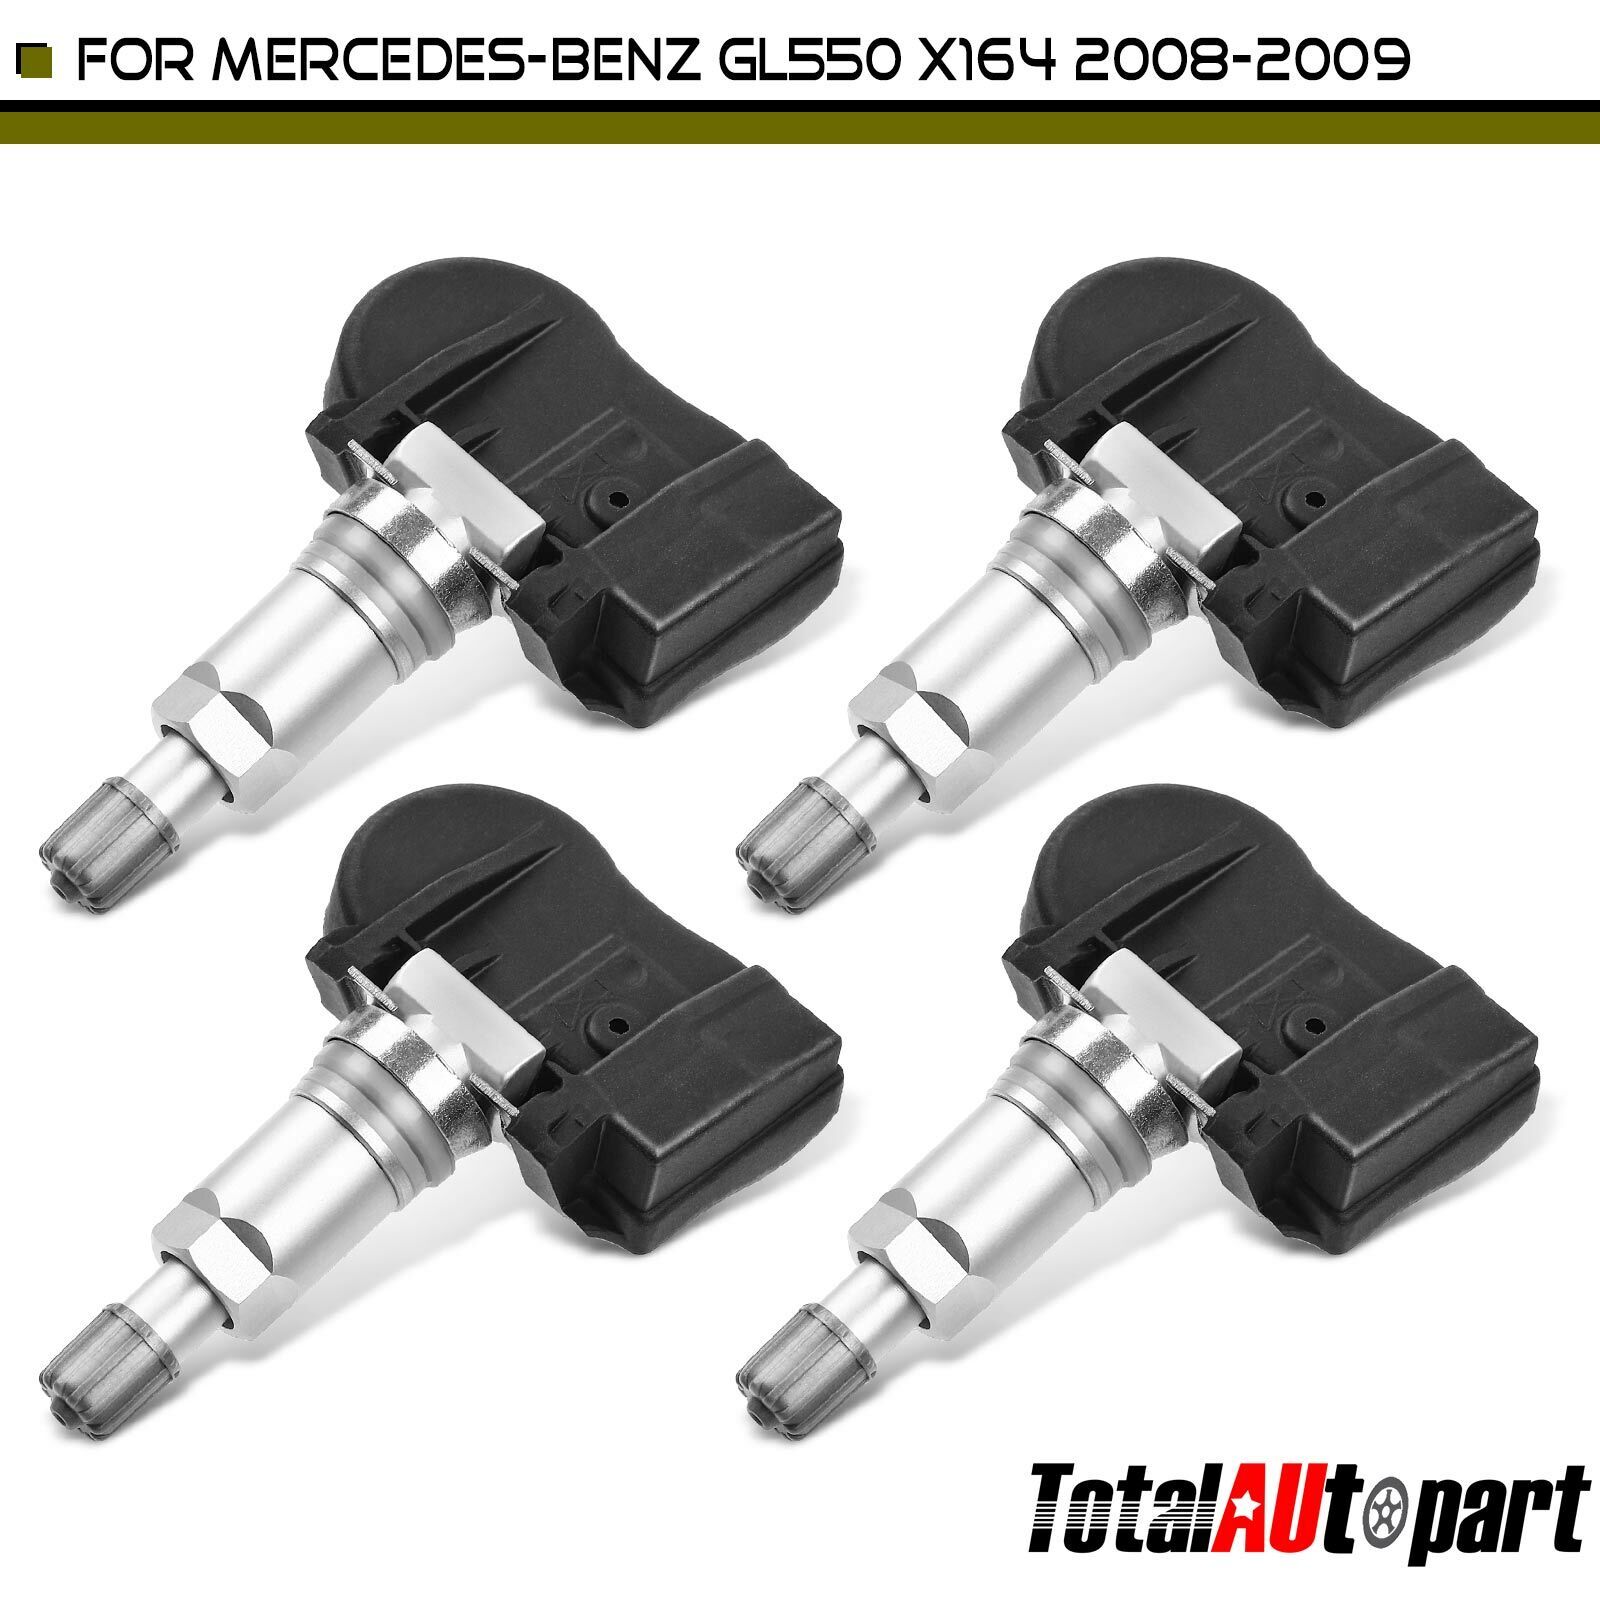 4x Tire Pressure Monitoring System Sensor for Mercedes-Benz ML500 W164 CLS550